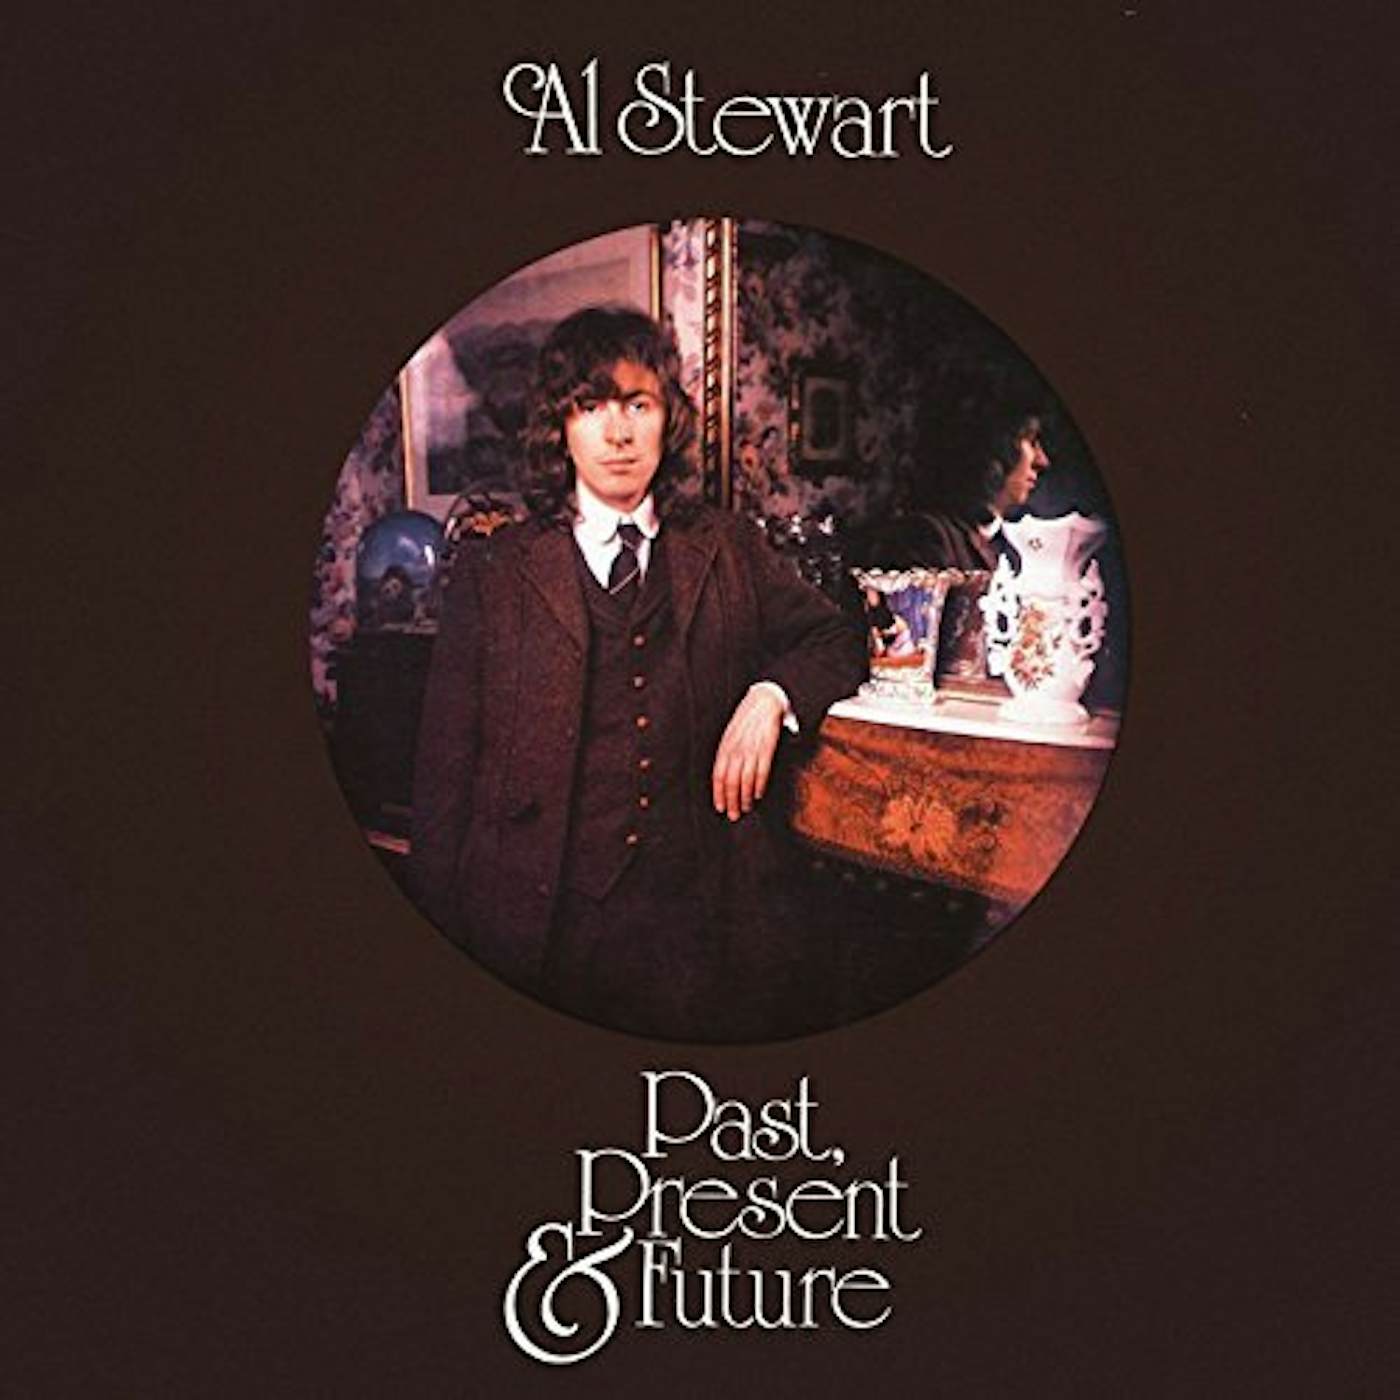 Al Stewart PAST PRESENT & FUTURE: REMASTERED & EXPANDED CD